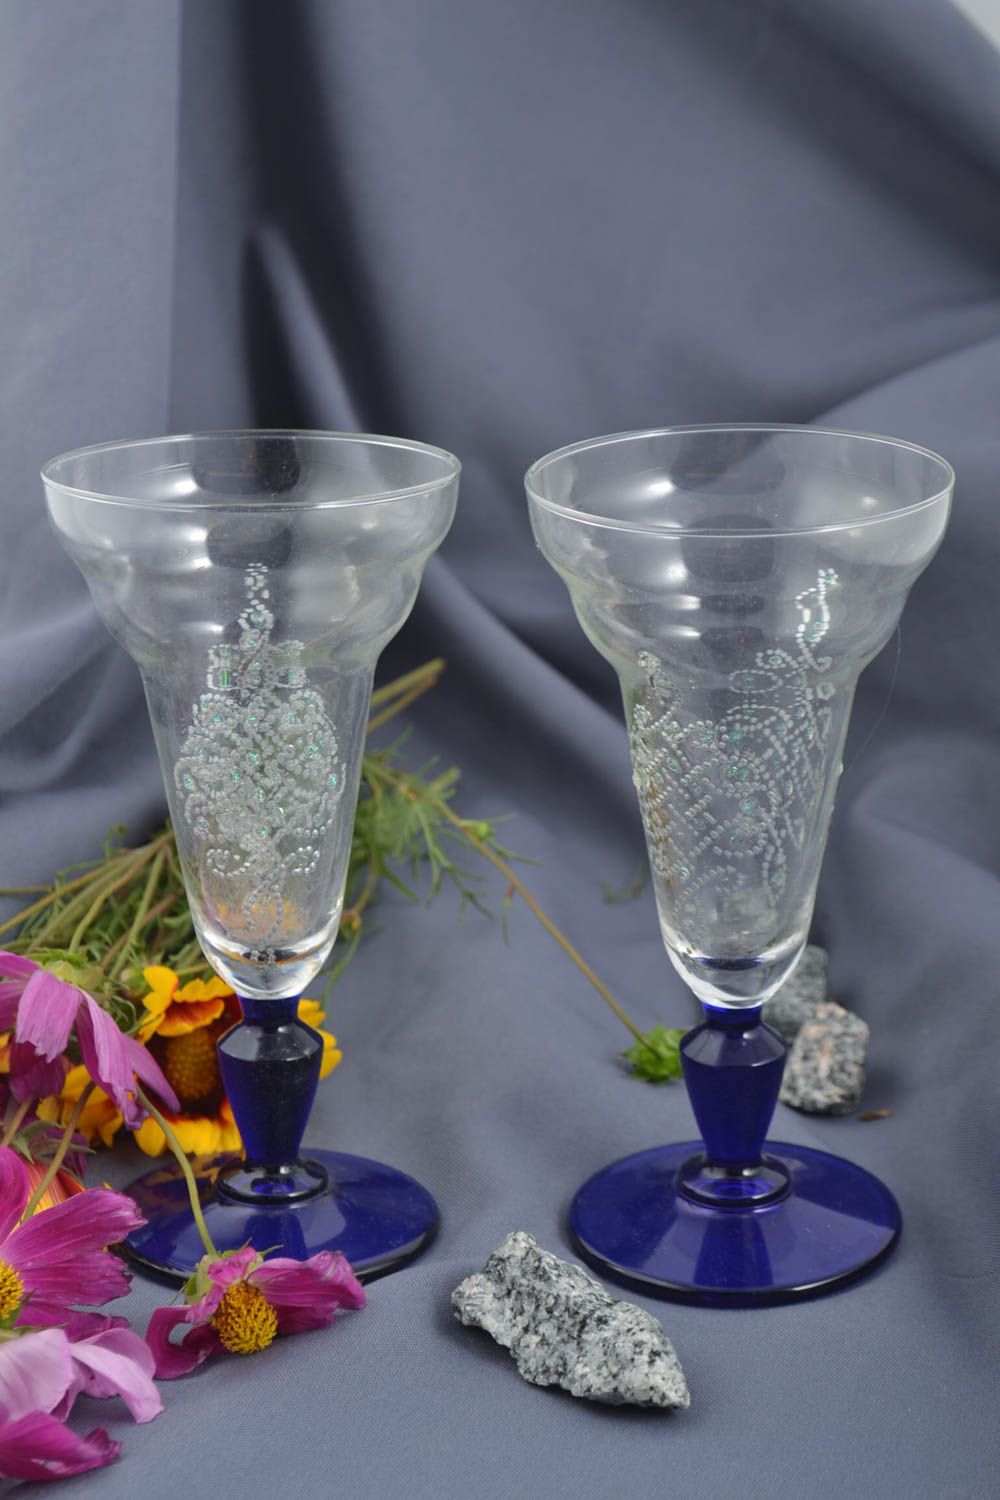 Handmade stylish set of glasses interesting painted ware home decor 2 pieces photo 1